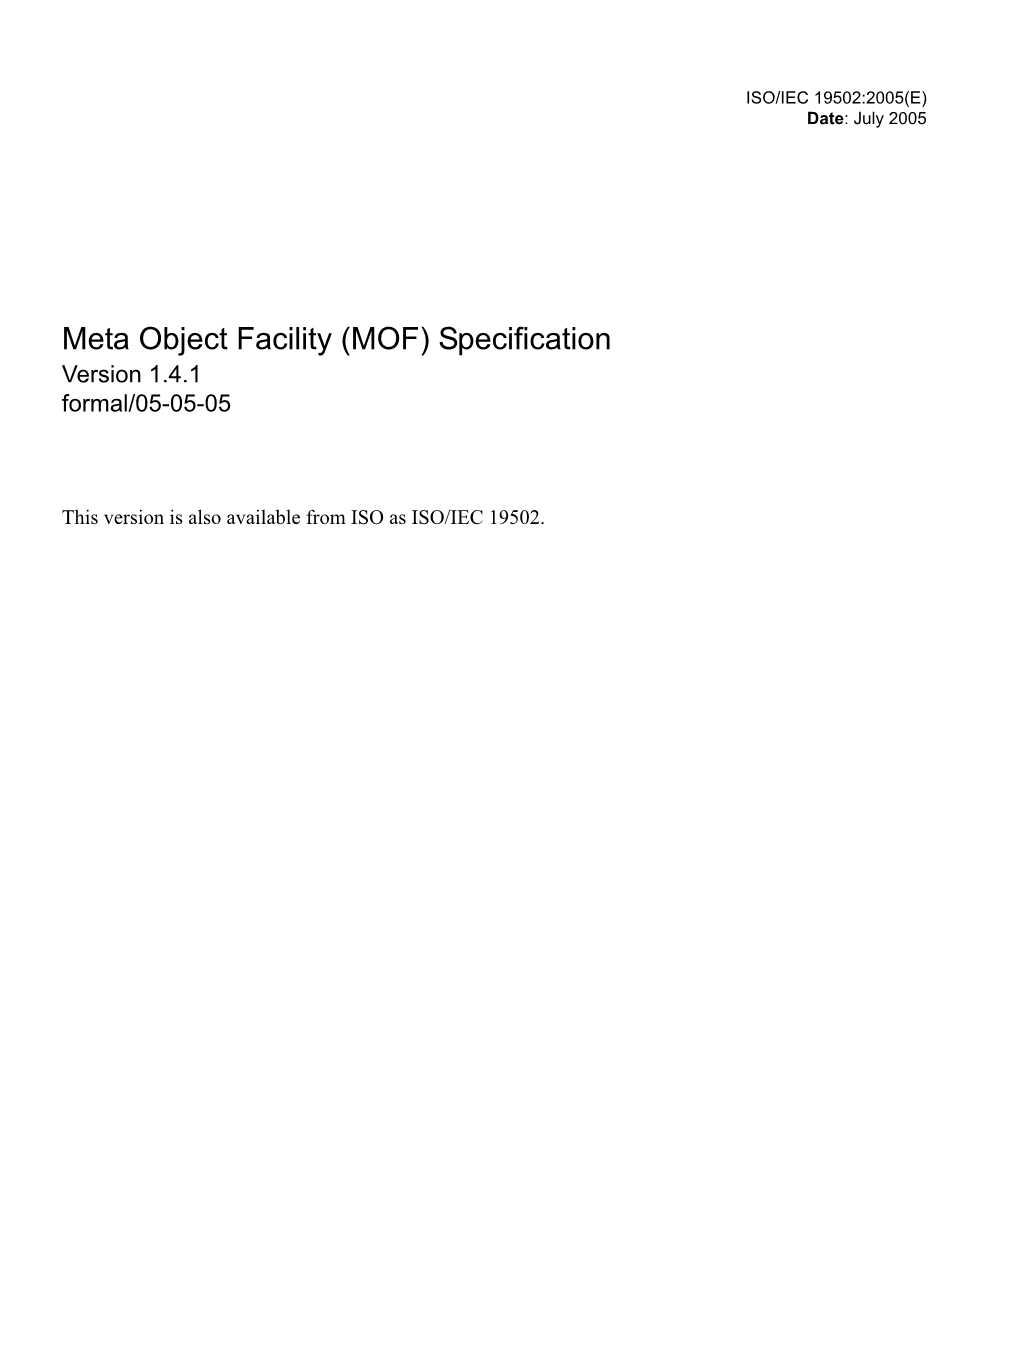 Meta Object Facility (MOF) Specification Version 1.4.1 Formal/05-05-05